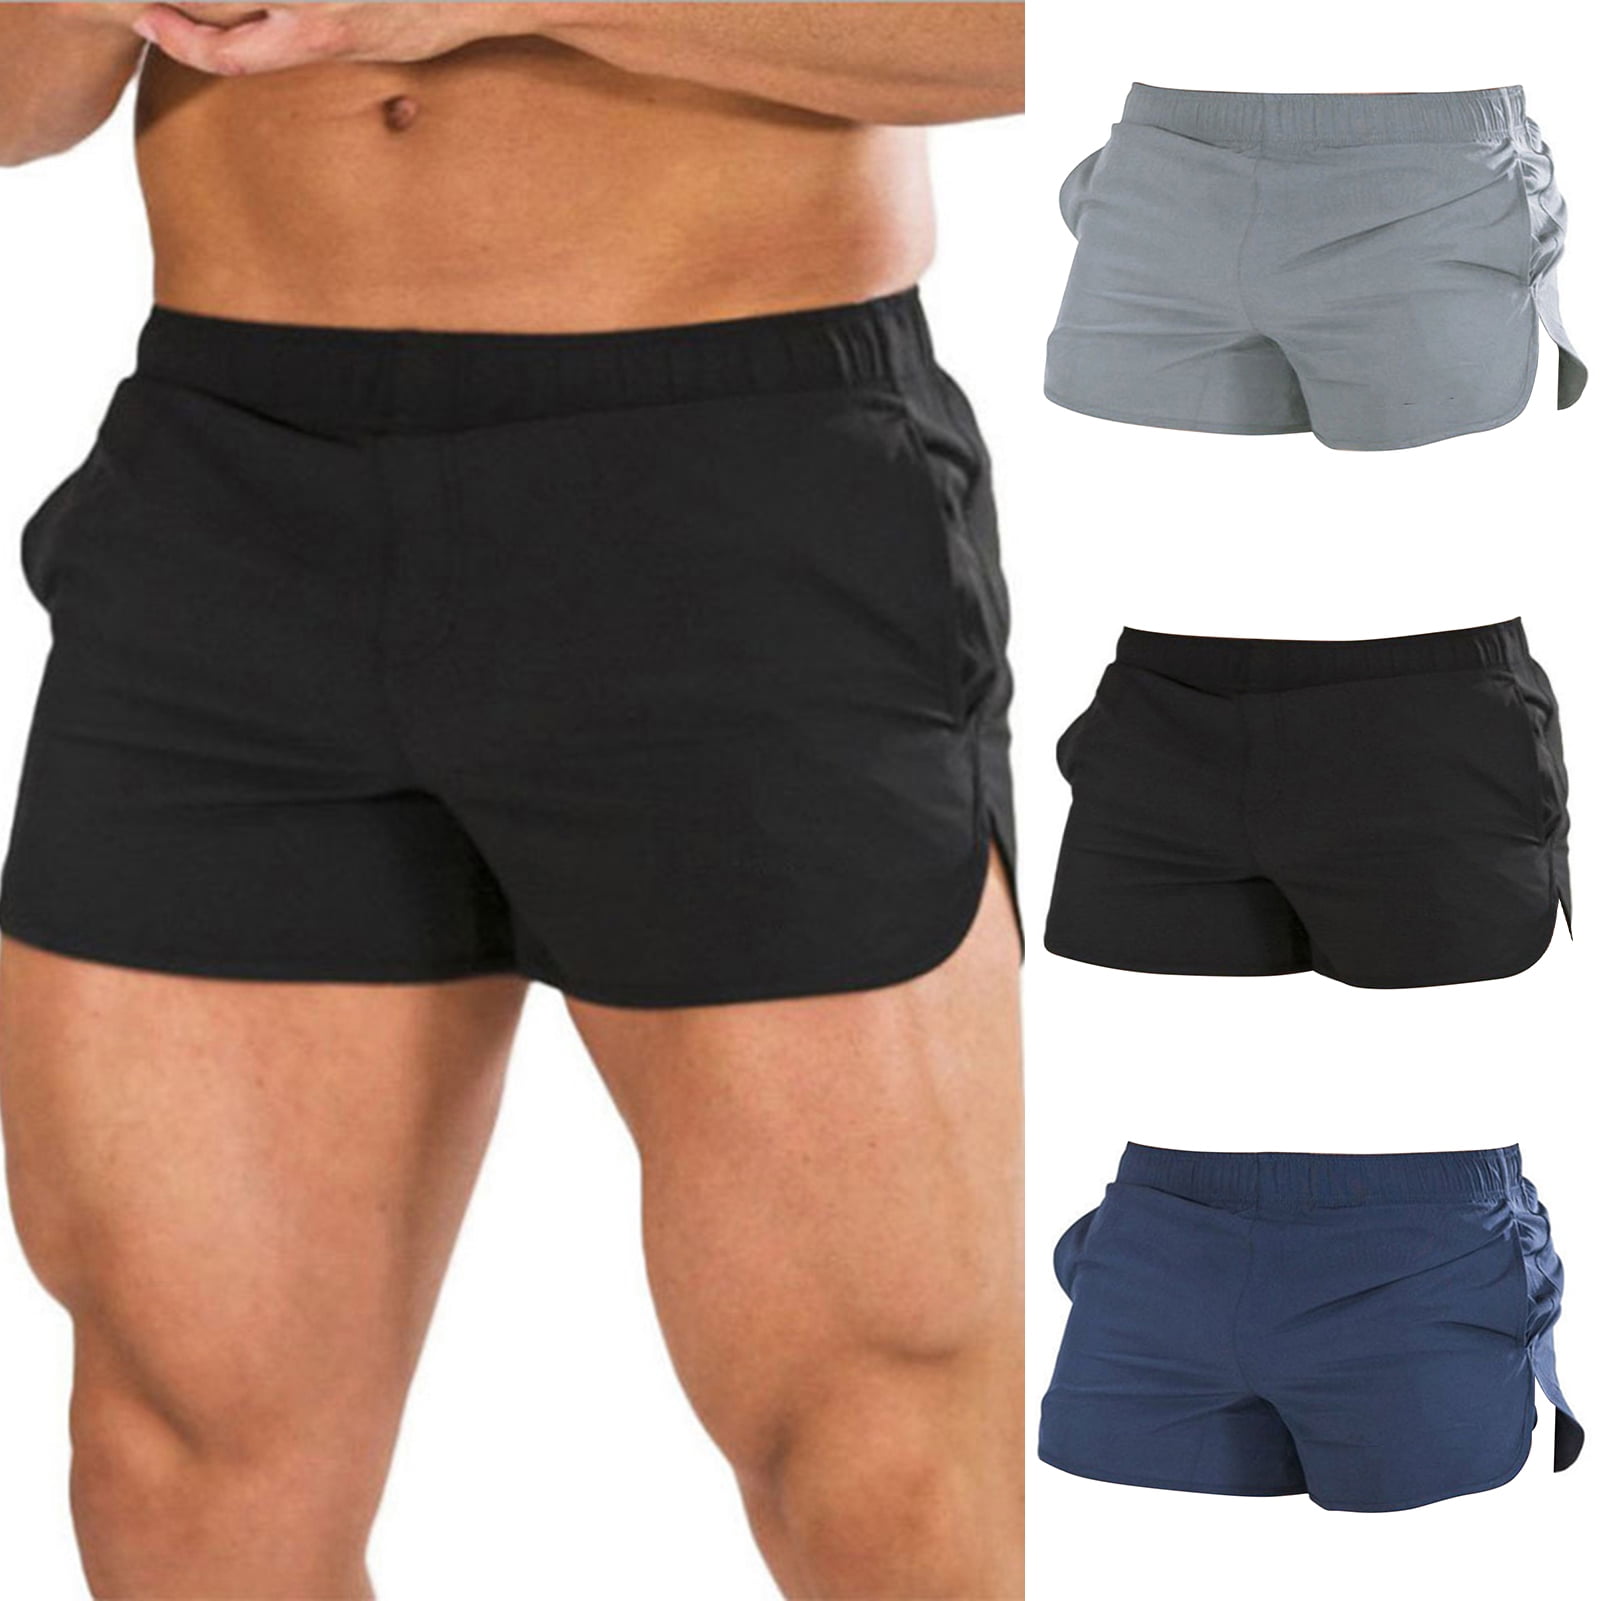 Mens Casual Shorts Summers Professional Cotton Rugby Shorts Quick Dry Running Gym Casual Short with Elastic Waist Pockets Running Shorts Breathable Active Training Exercise Jogging Cycling Shorts 